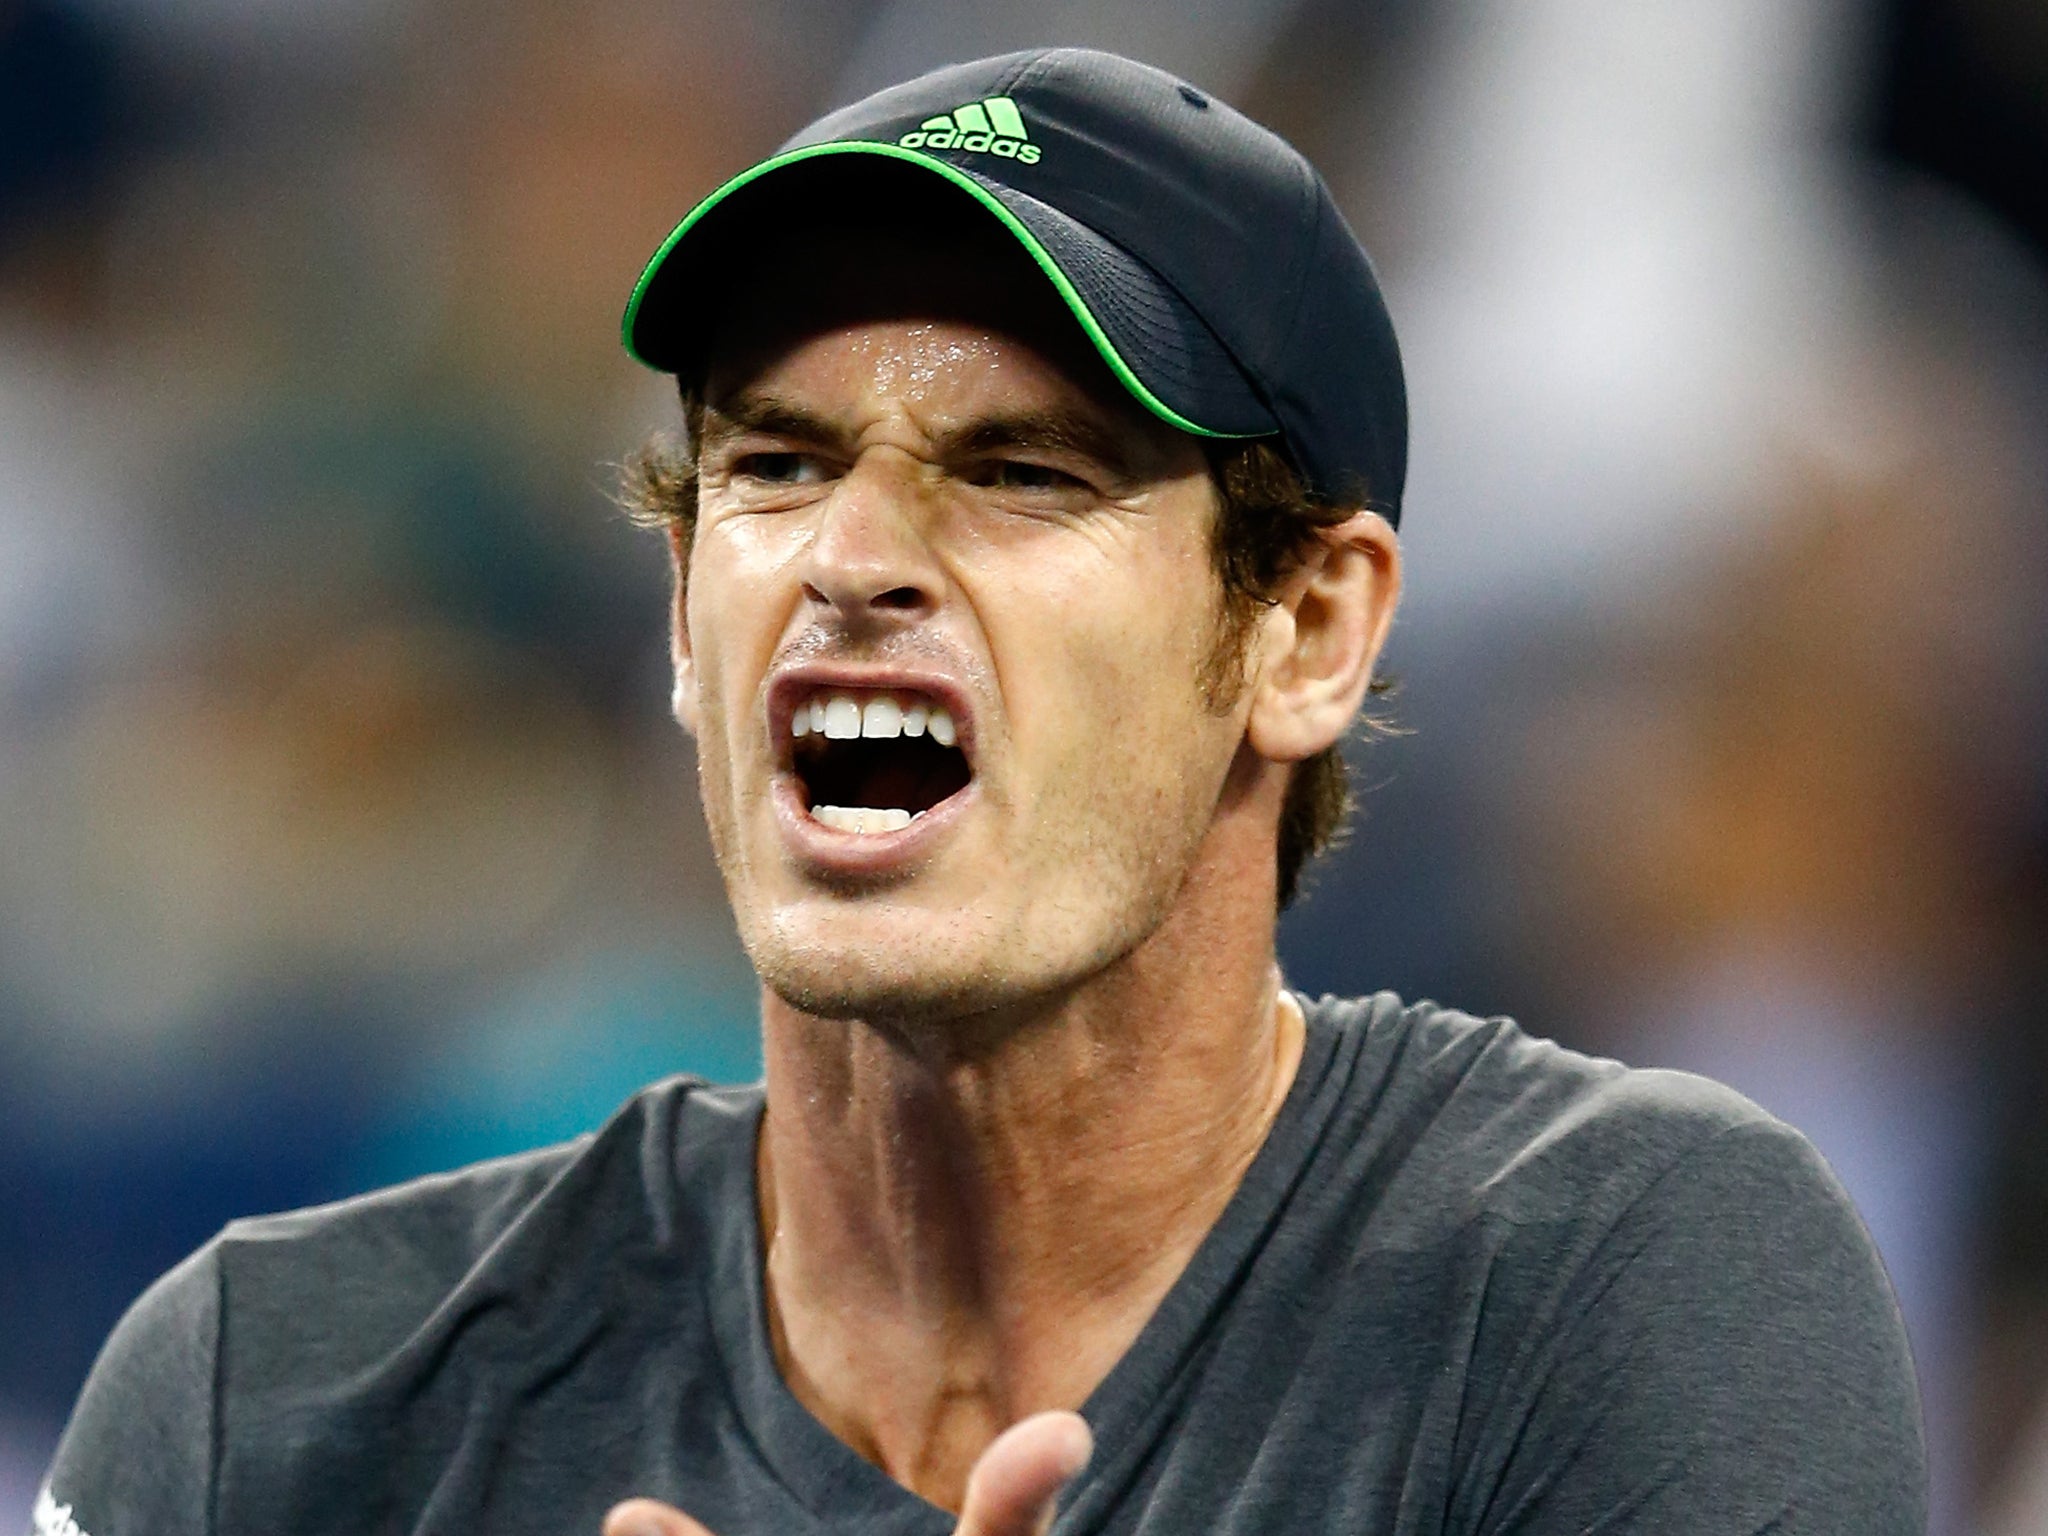 Andy Murray won three titles running in Asia in 2011 and now hopes to do the same again